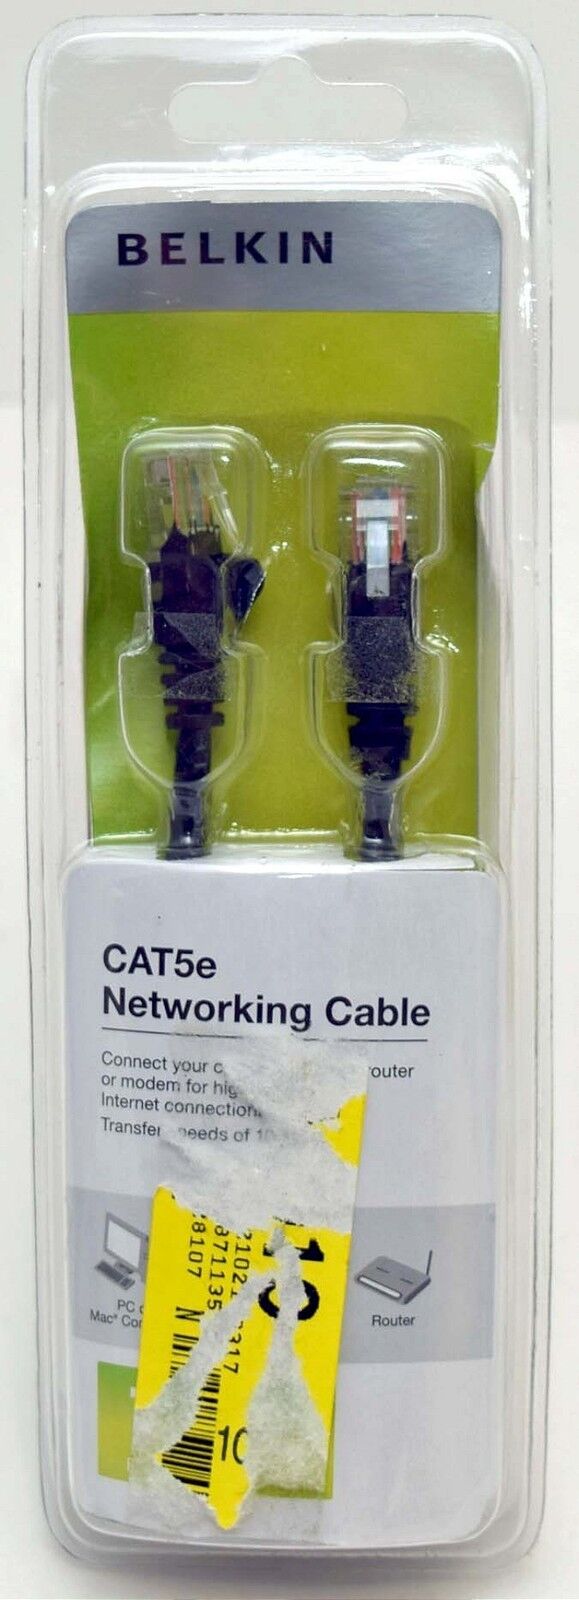 Belkin 7' ft 2.13m Cat5e Networking Ethernet Cable BLACK Router PC/Mac Computer